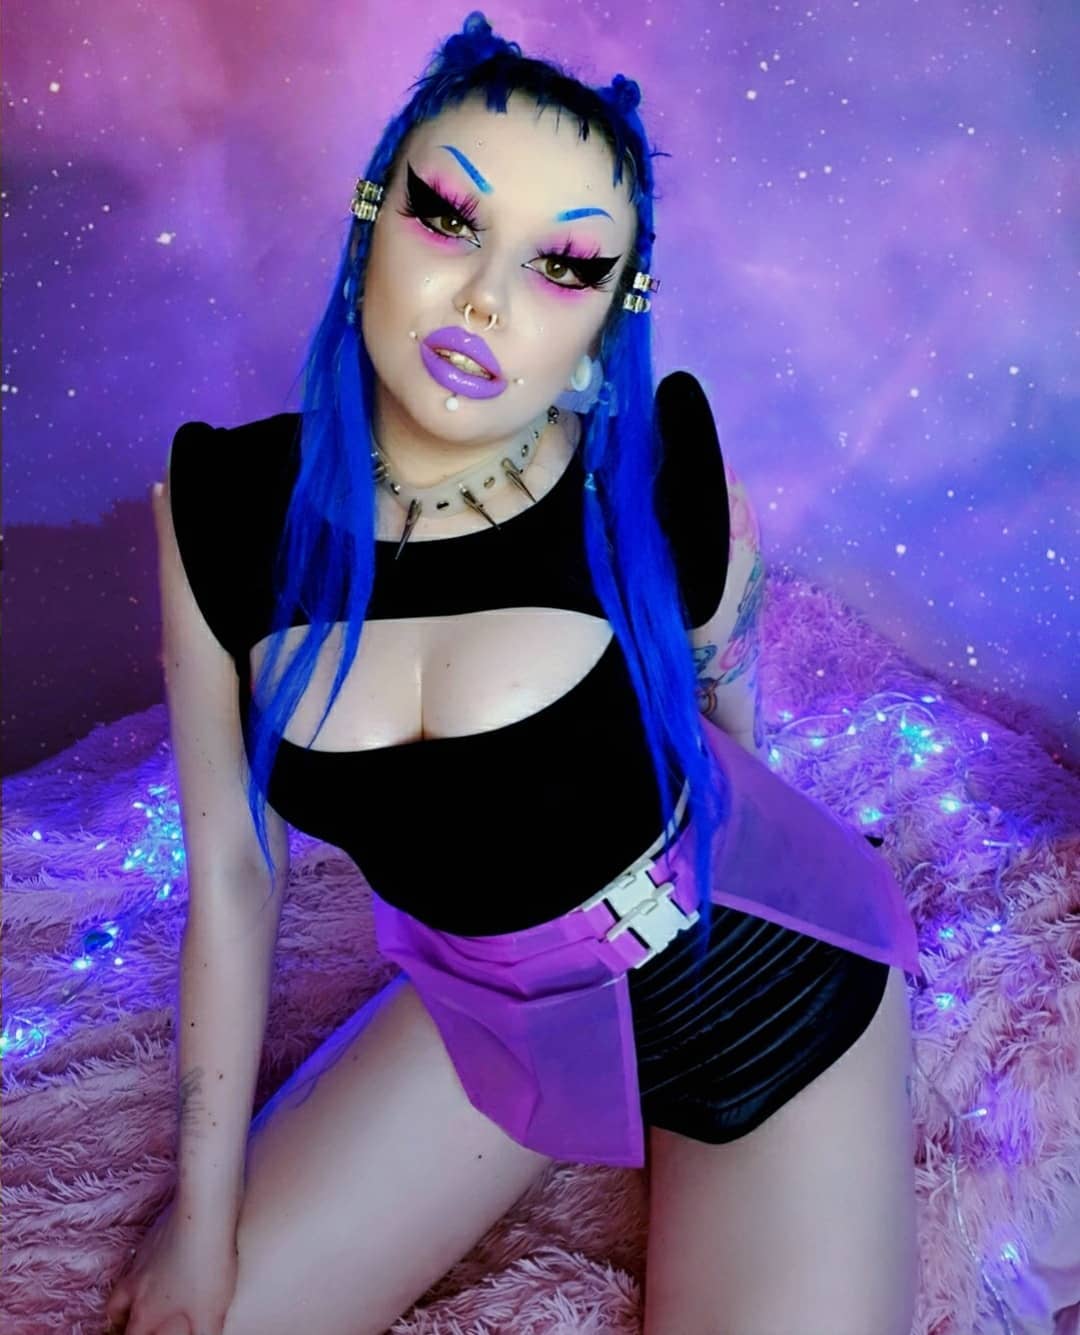 People call me different names due to my appearance- Self Acclaimed Bimbo Alien laments